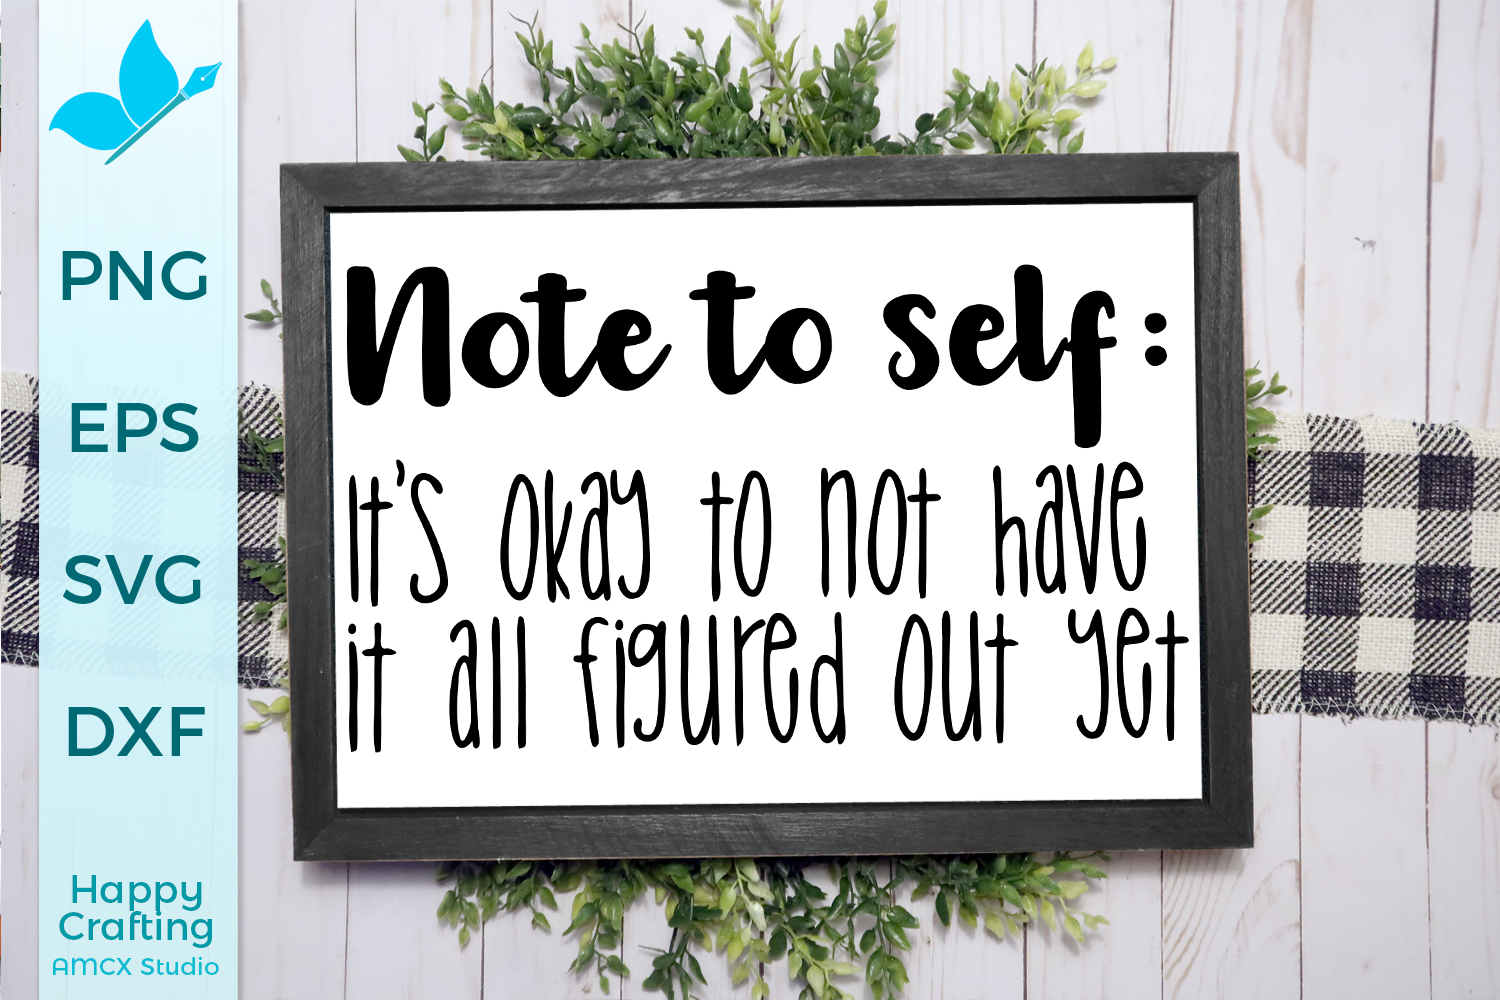 Download Note To Self - Positive Quotes SVG